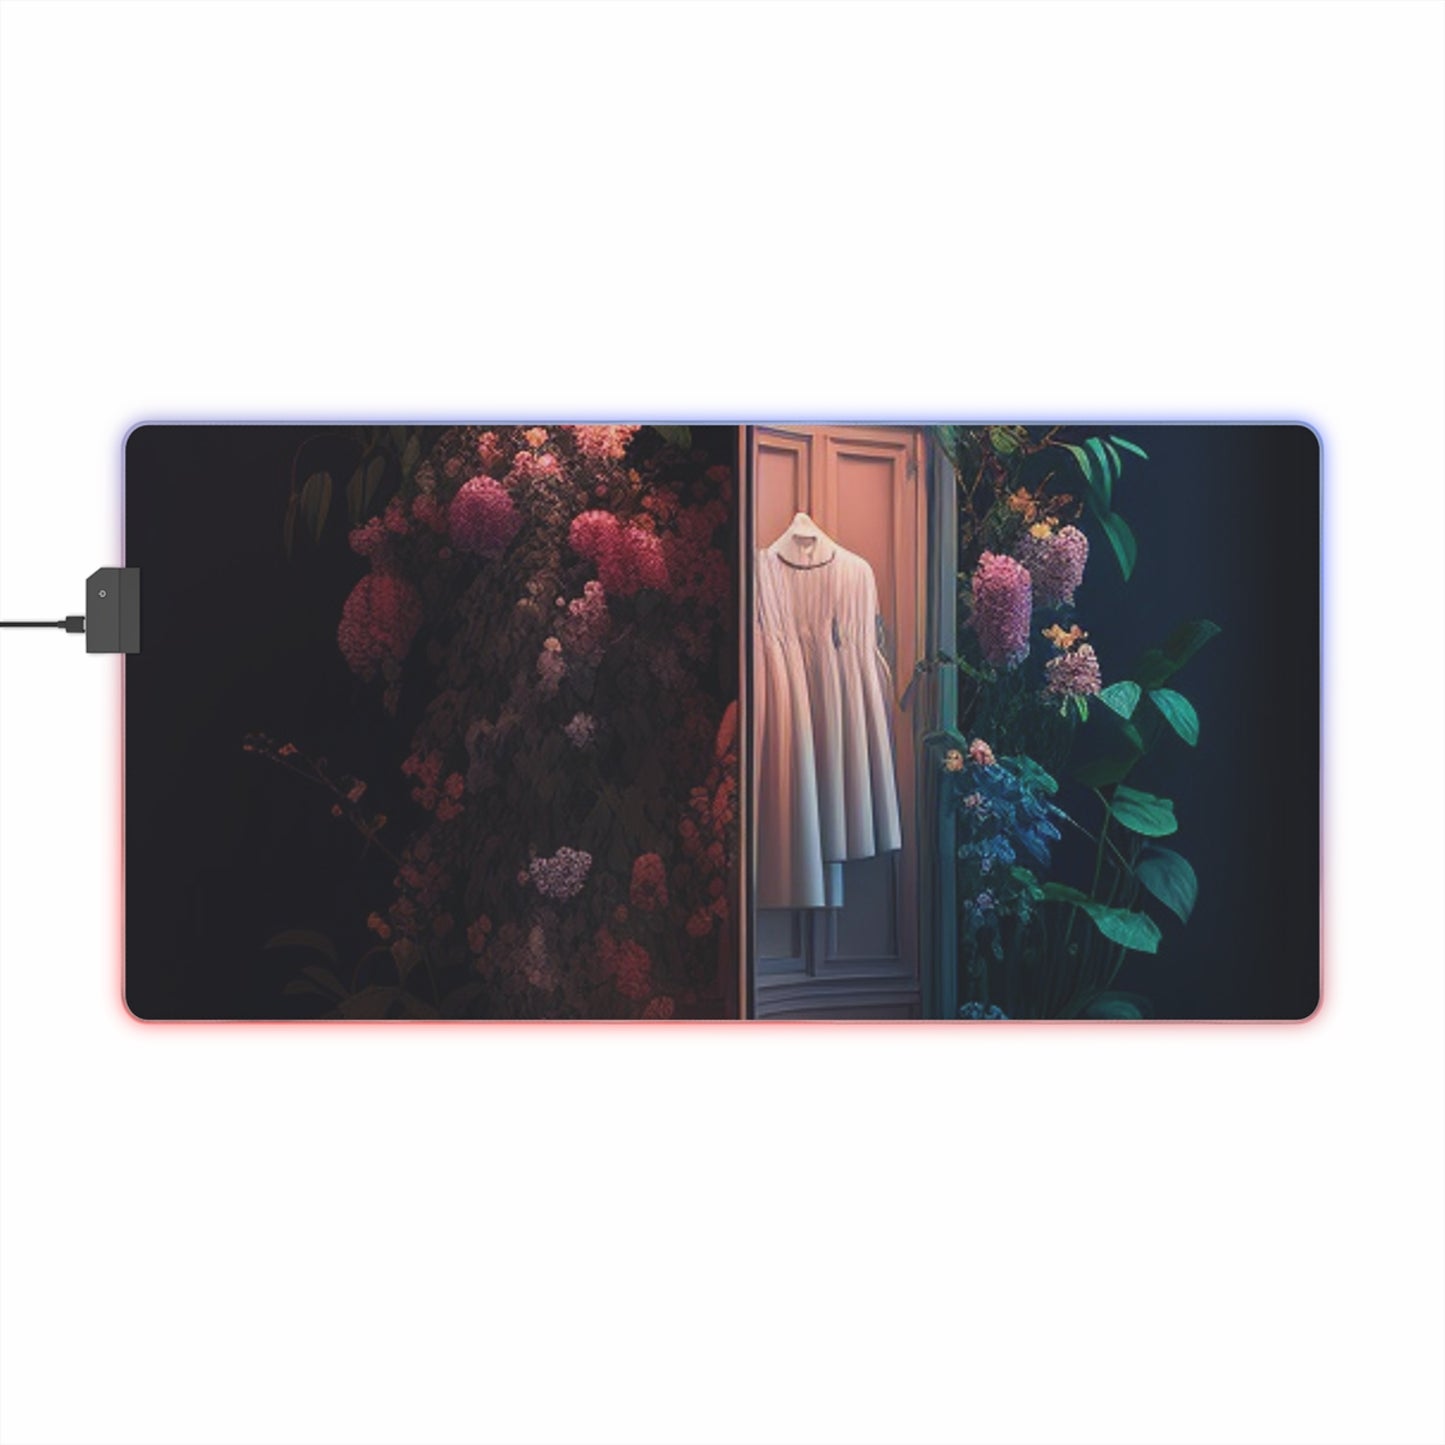 LED Gaming Mouse Pad A Wardrobe Surrounded by Flowers 3